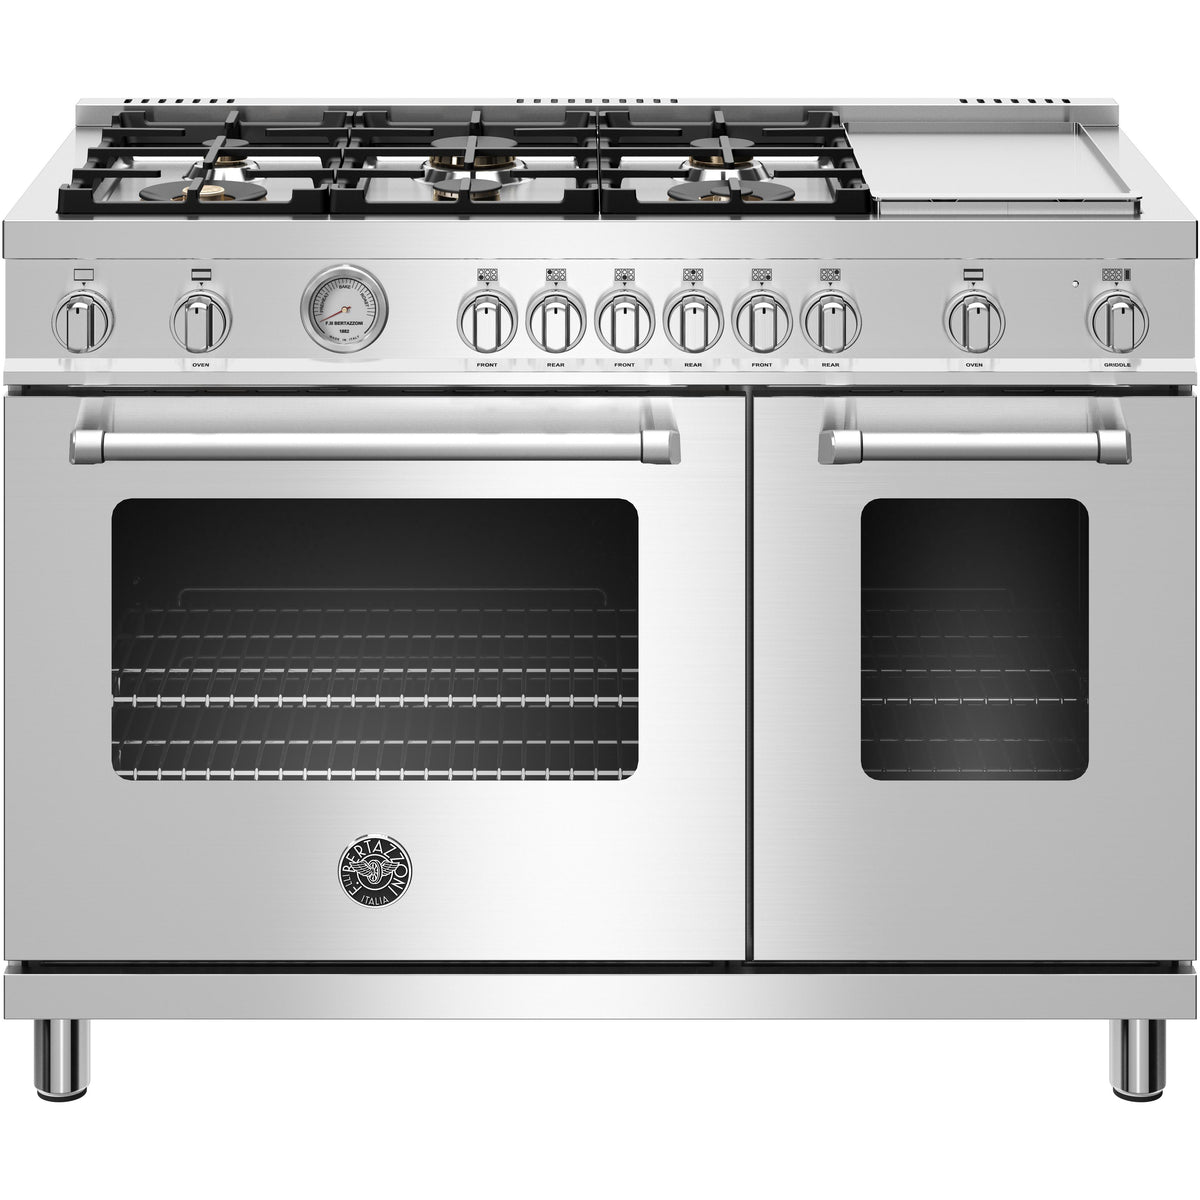 48-inch Freestanding Gas Range with Griddle MAST486GGASXT IMAGE 1